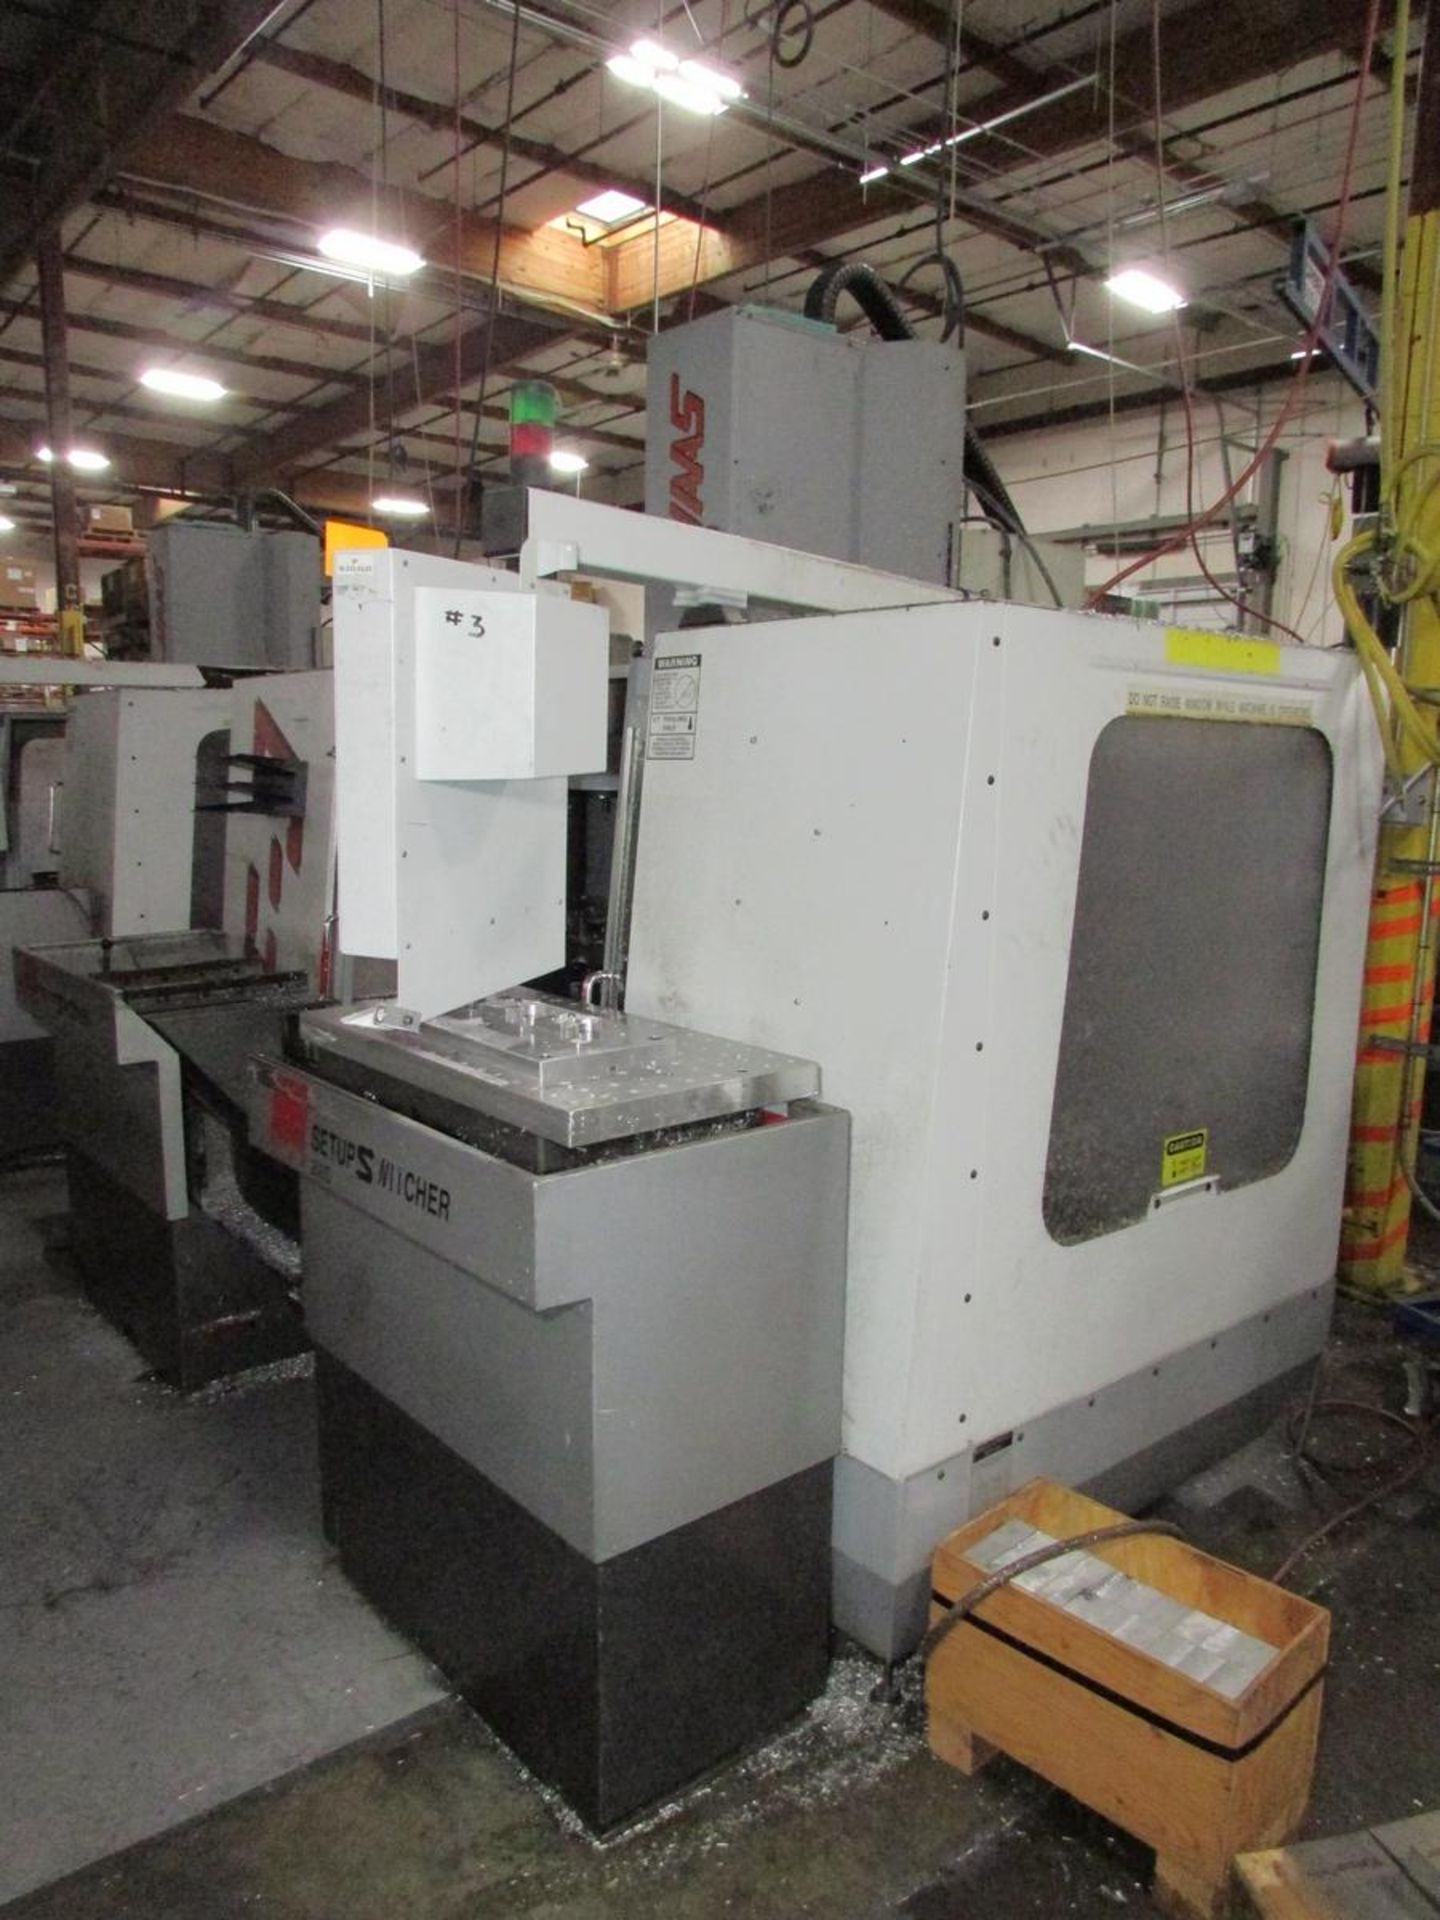 1996 Haas VF-3 3-Axis CNC Vertical Maching Center w/ SMW 200S Setup Switcher Pallet System - Image 12 of 23